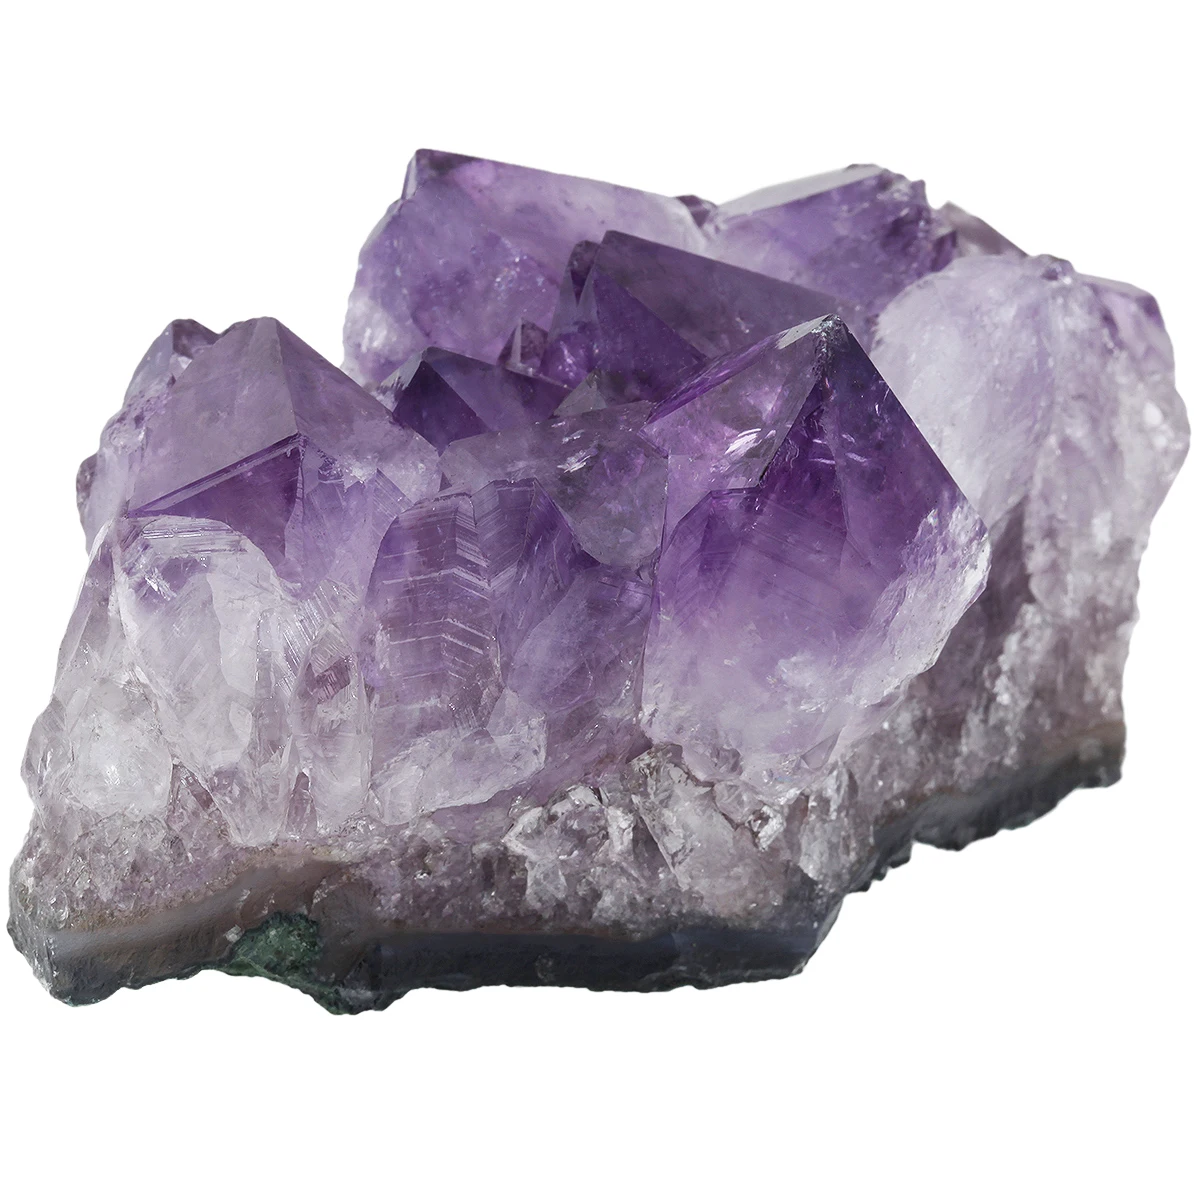 TUMBEELLUWA Natural Raw Amethyst Cluster Irregular Mineral Specimen Healing Crystal Stone Room Decor Home Decoration 10 50g natural rough malachite minerals healing gemstone specimen irregular stone ornaments for home decor